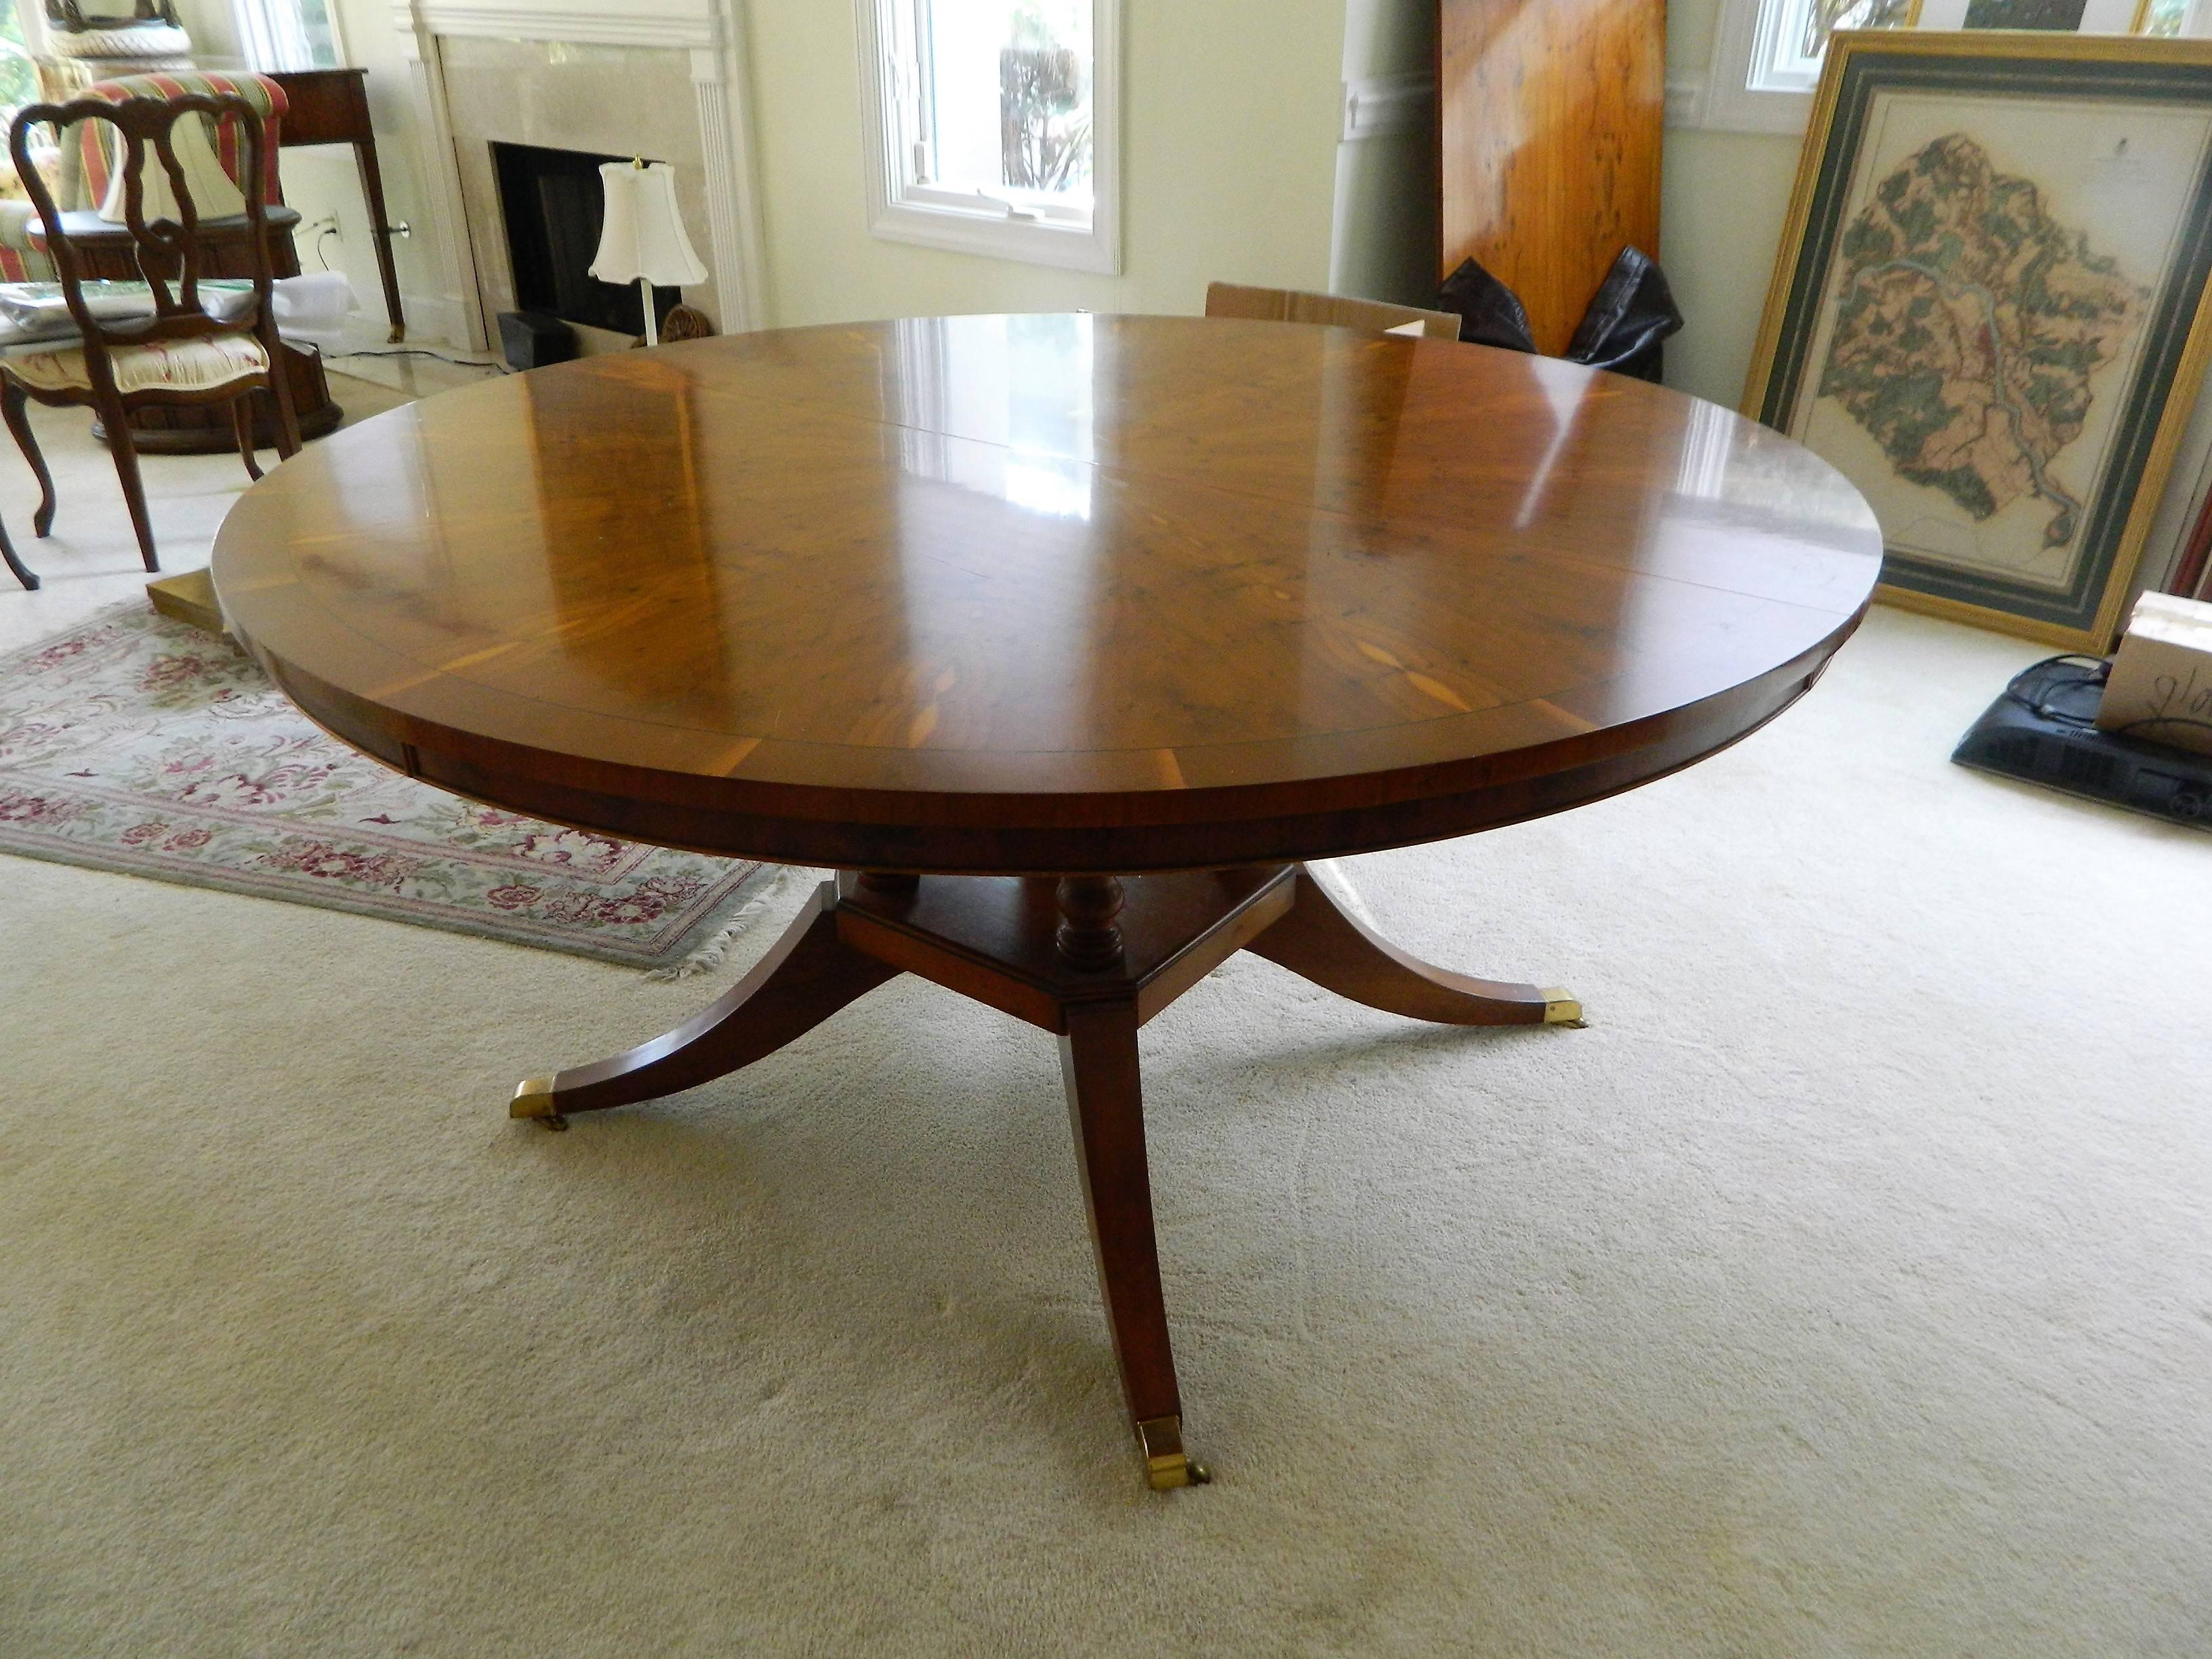 Georgian English Sunburst Dining Table with Two Leaves, Early 20th Century